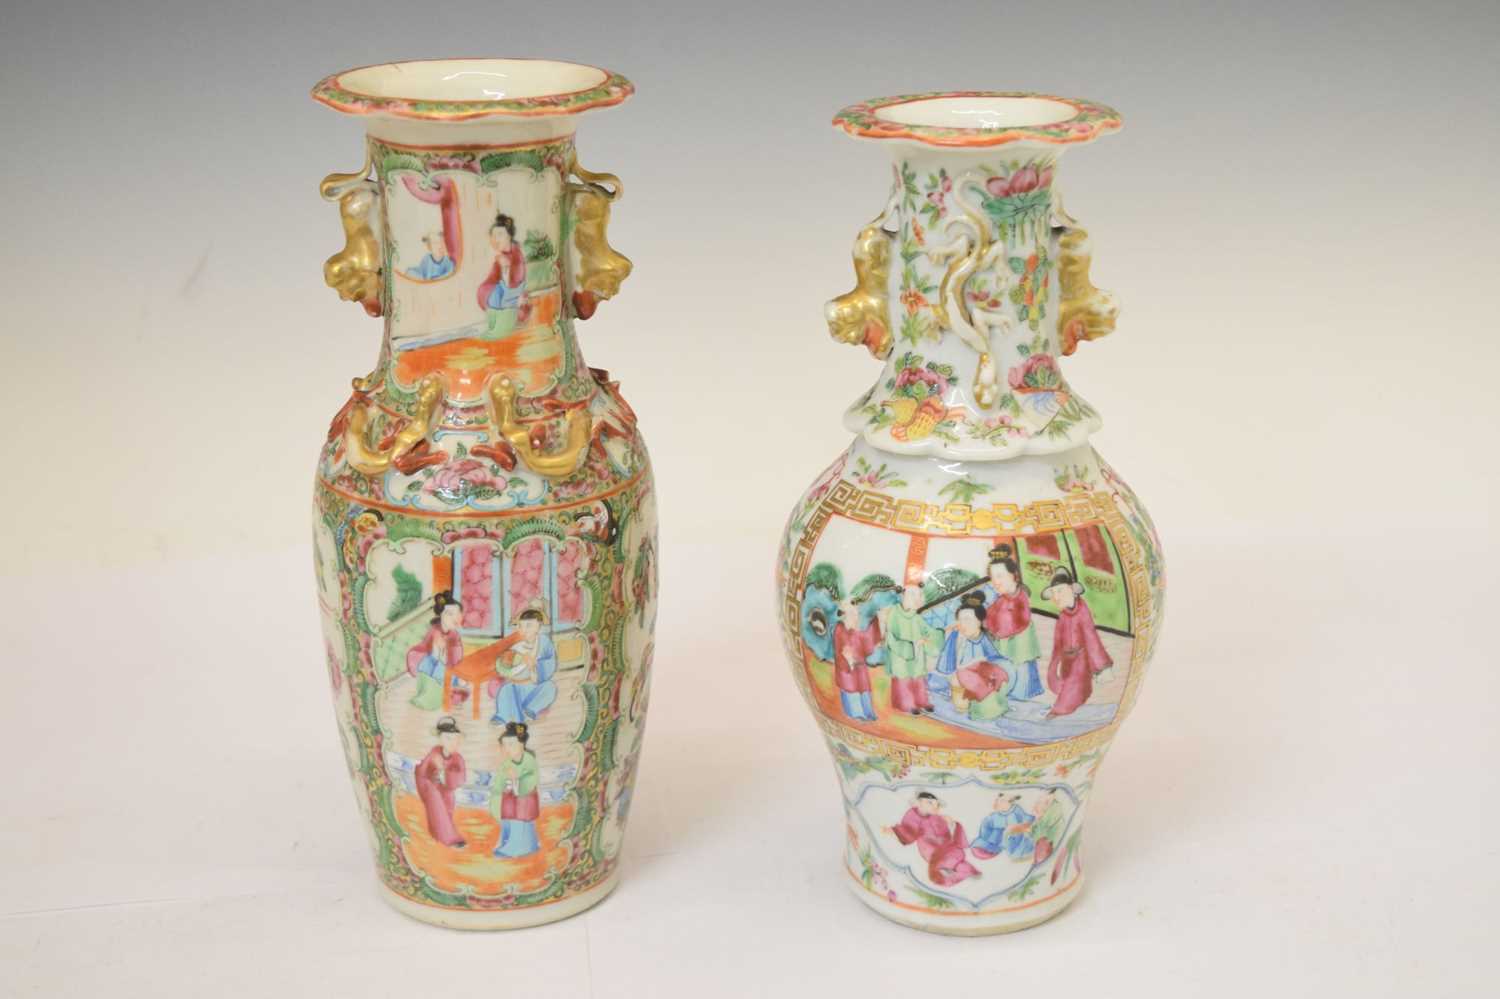 Two Chinese Famille Rose porcelain vases - Image 6 of 11